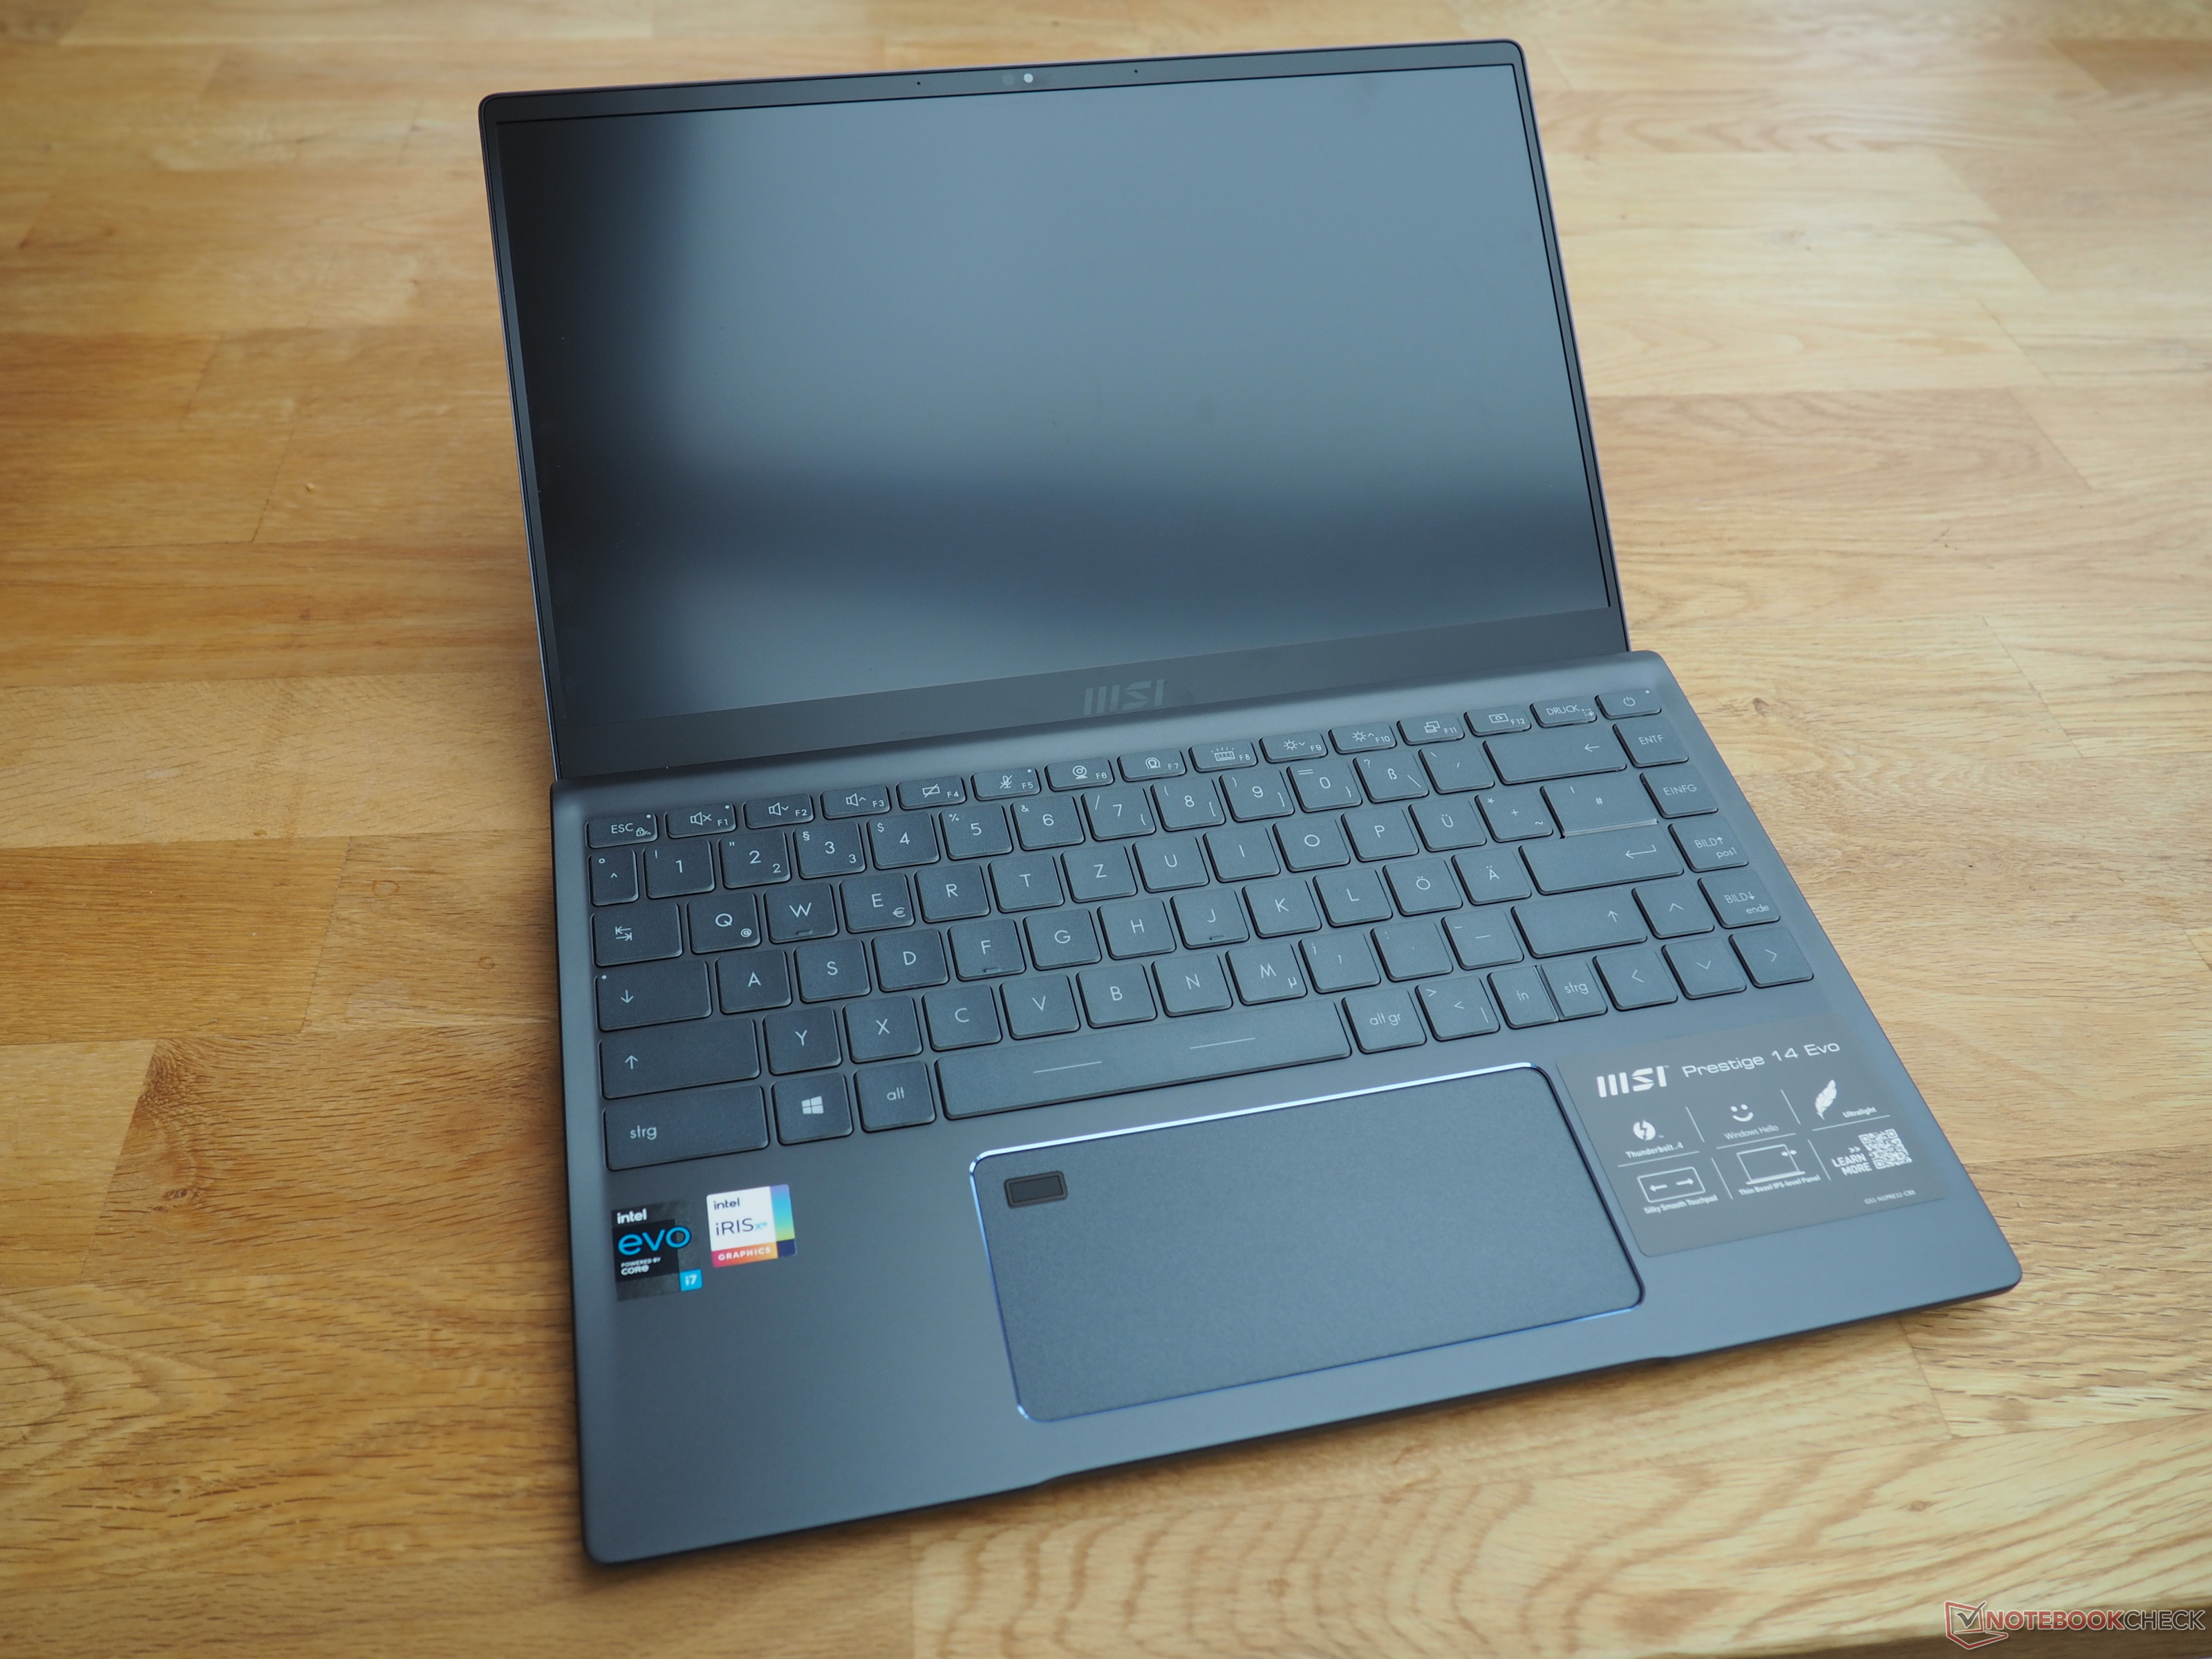 MSI Prestige 14 Evo laptop review: What are the capabilities of 